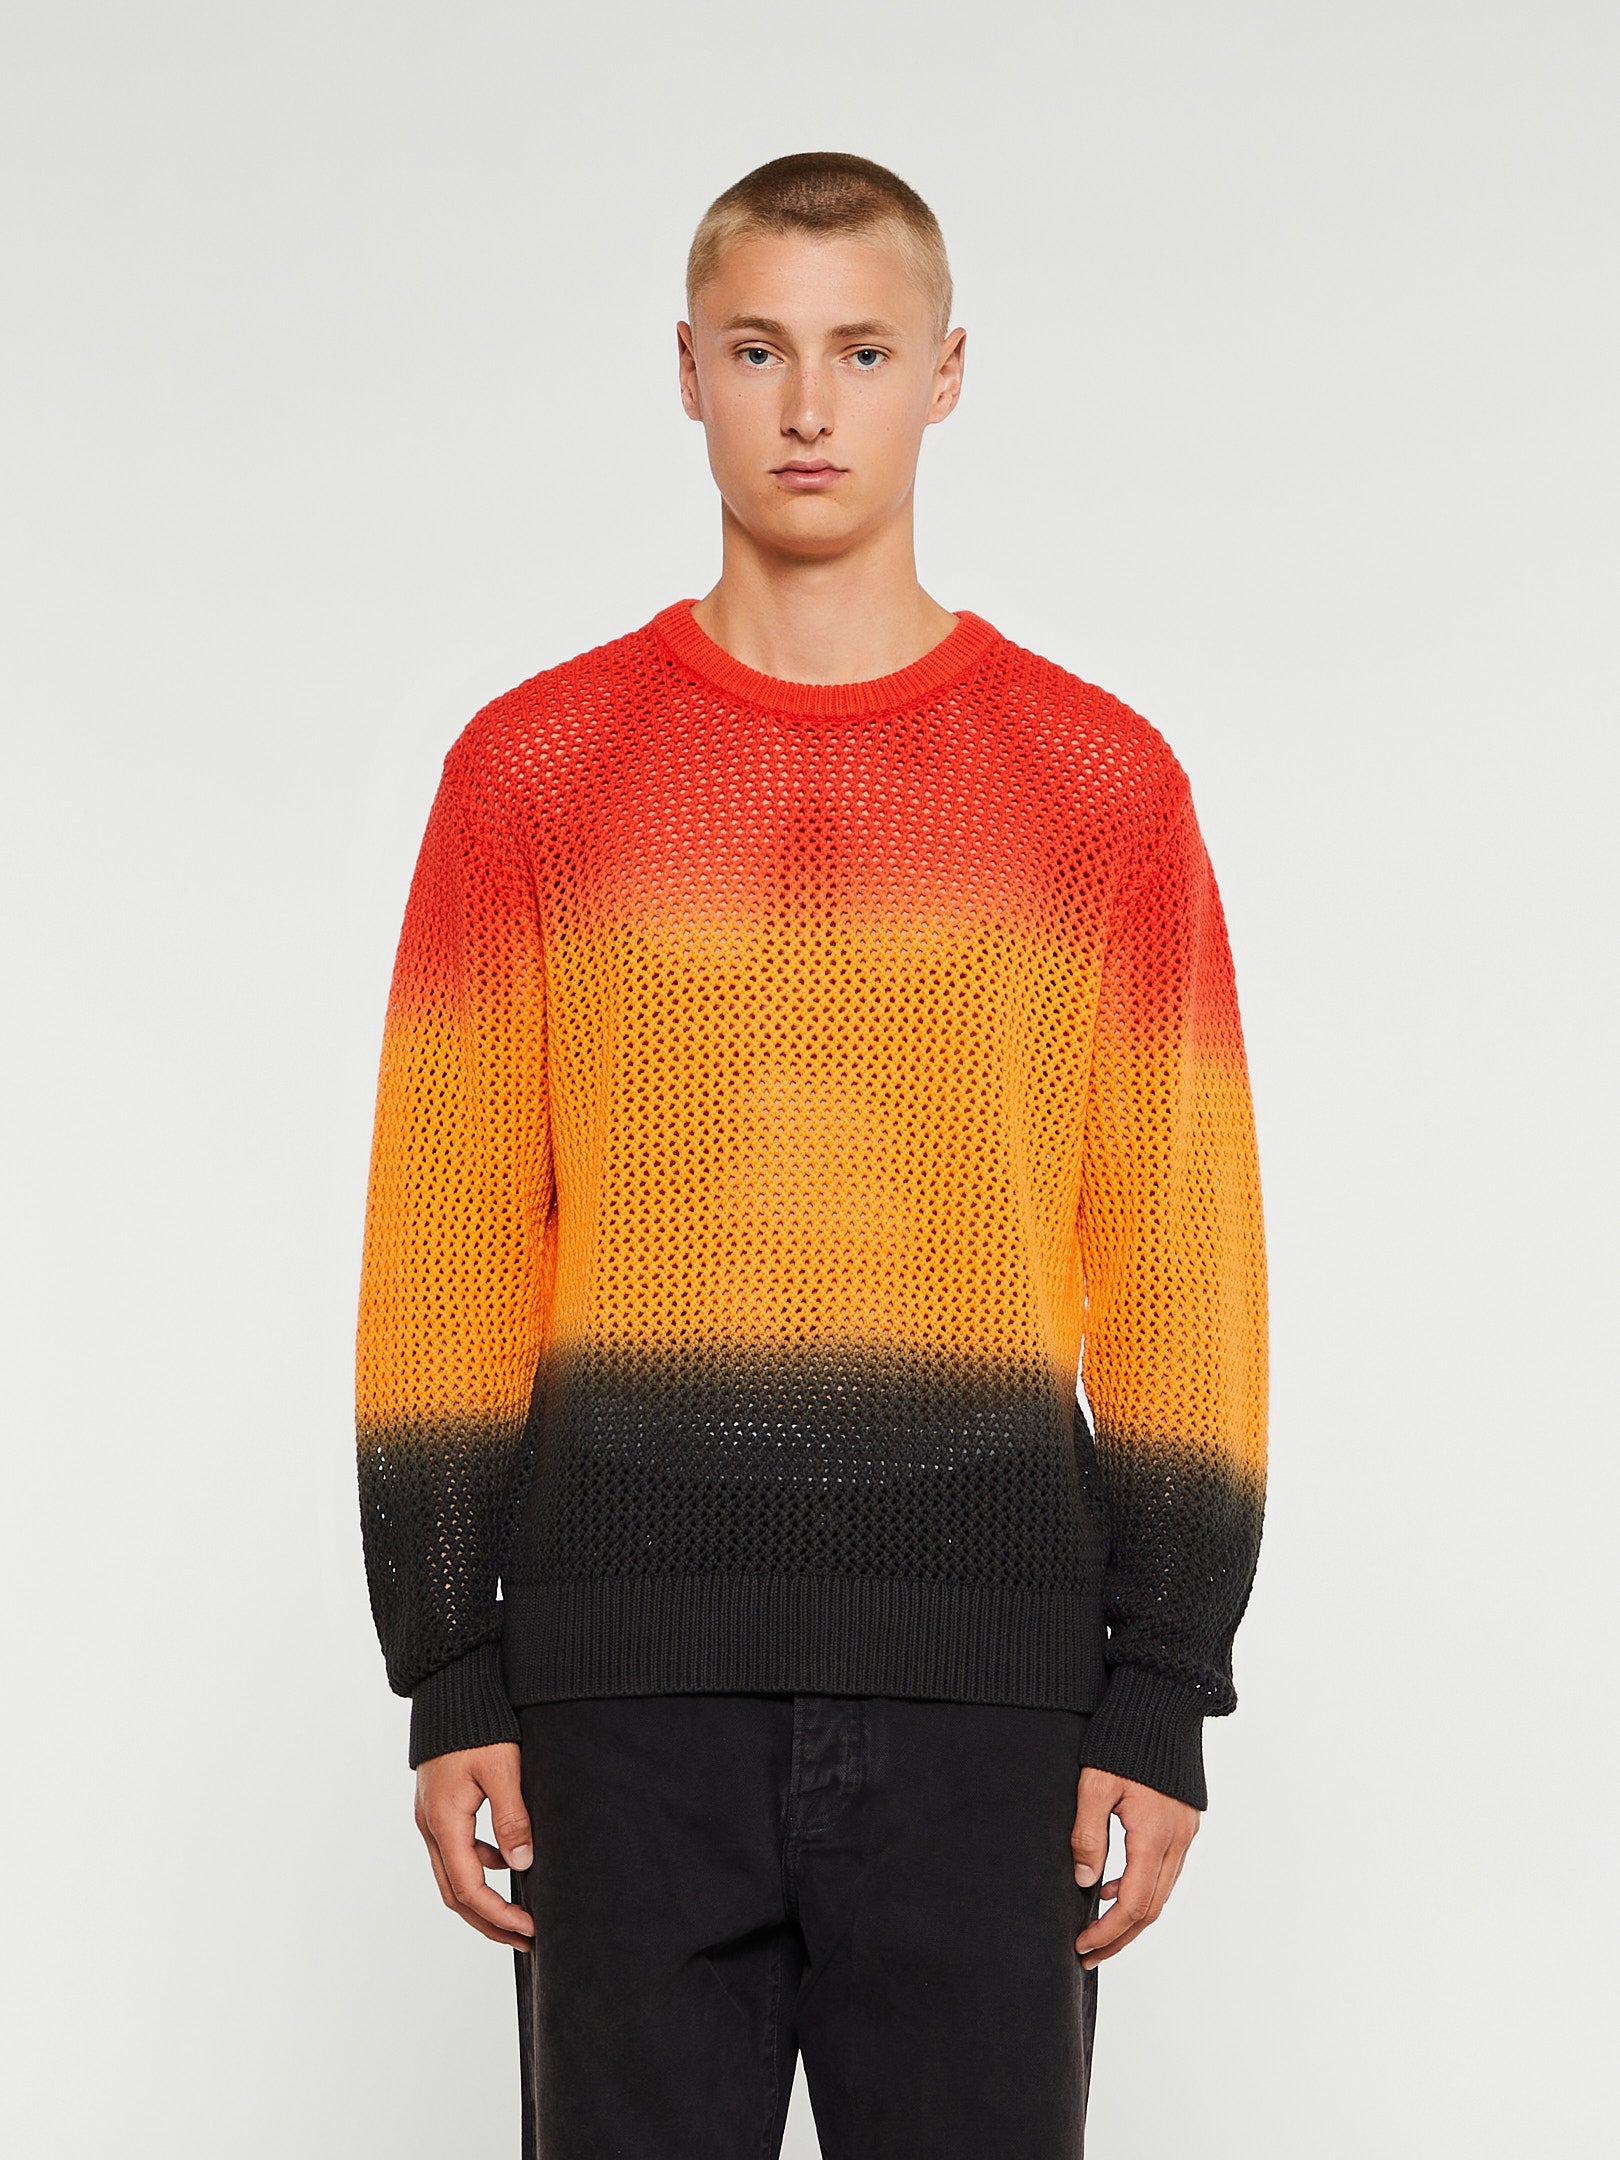 Stüssy - Pigment Dyed Loose Gauge Sweater in Lava